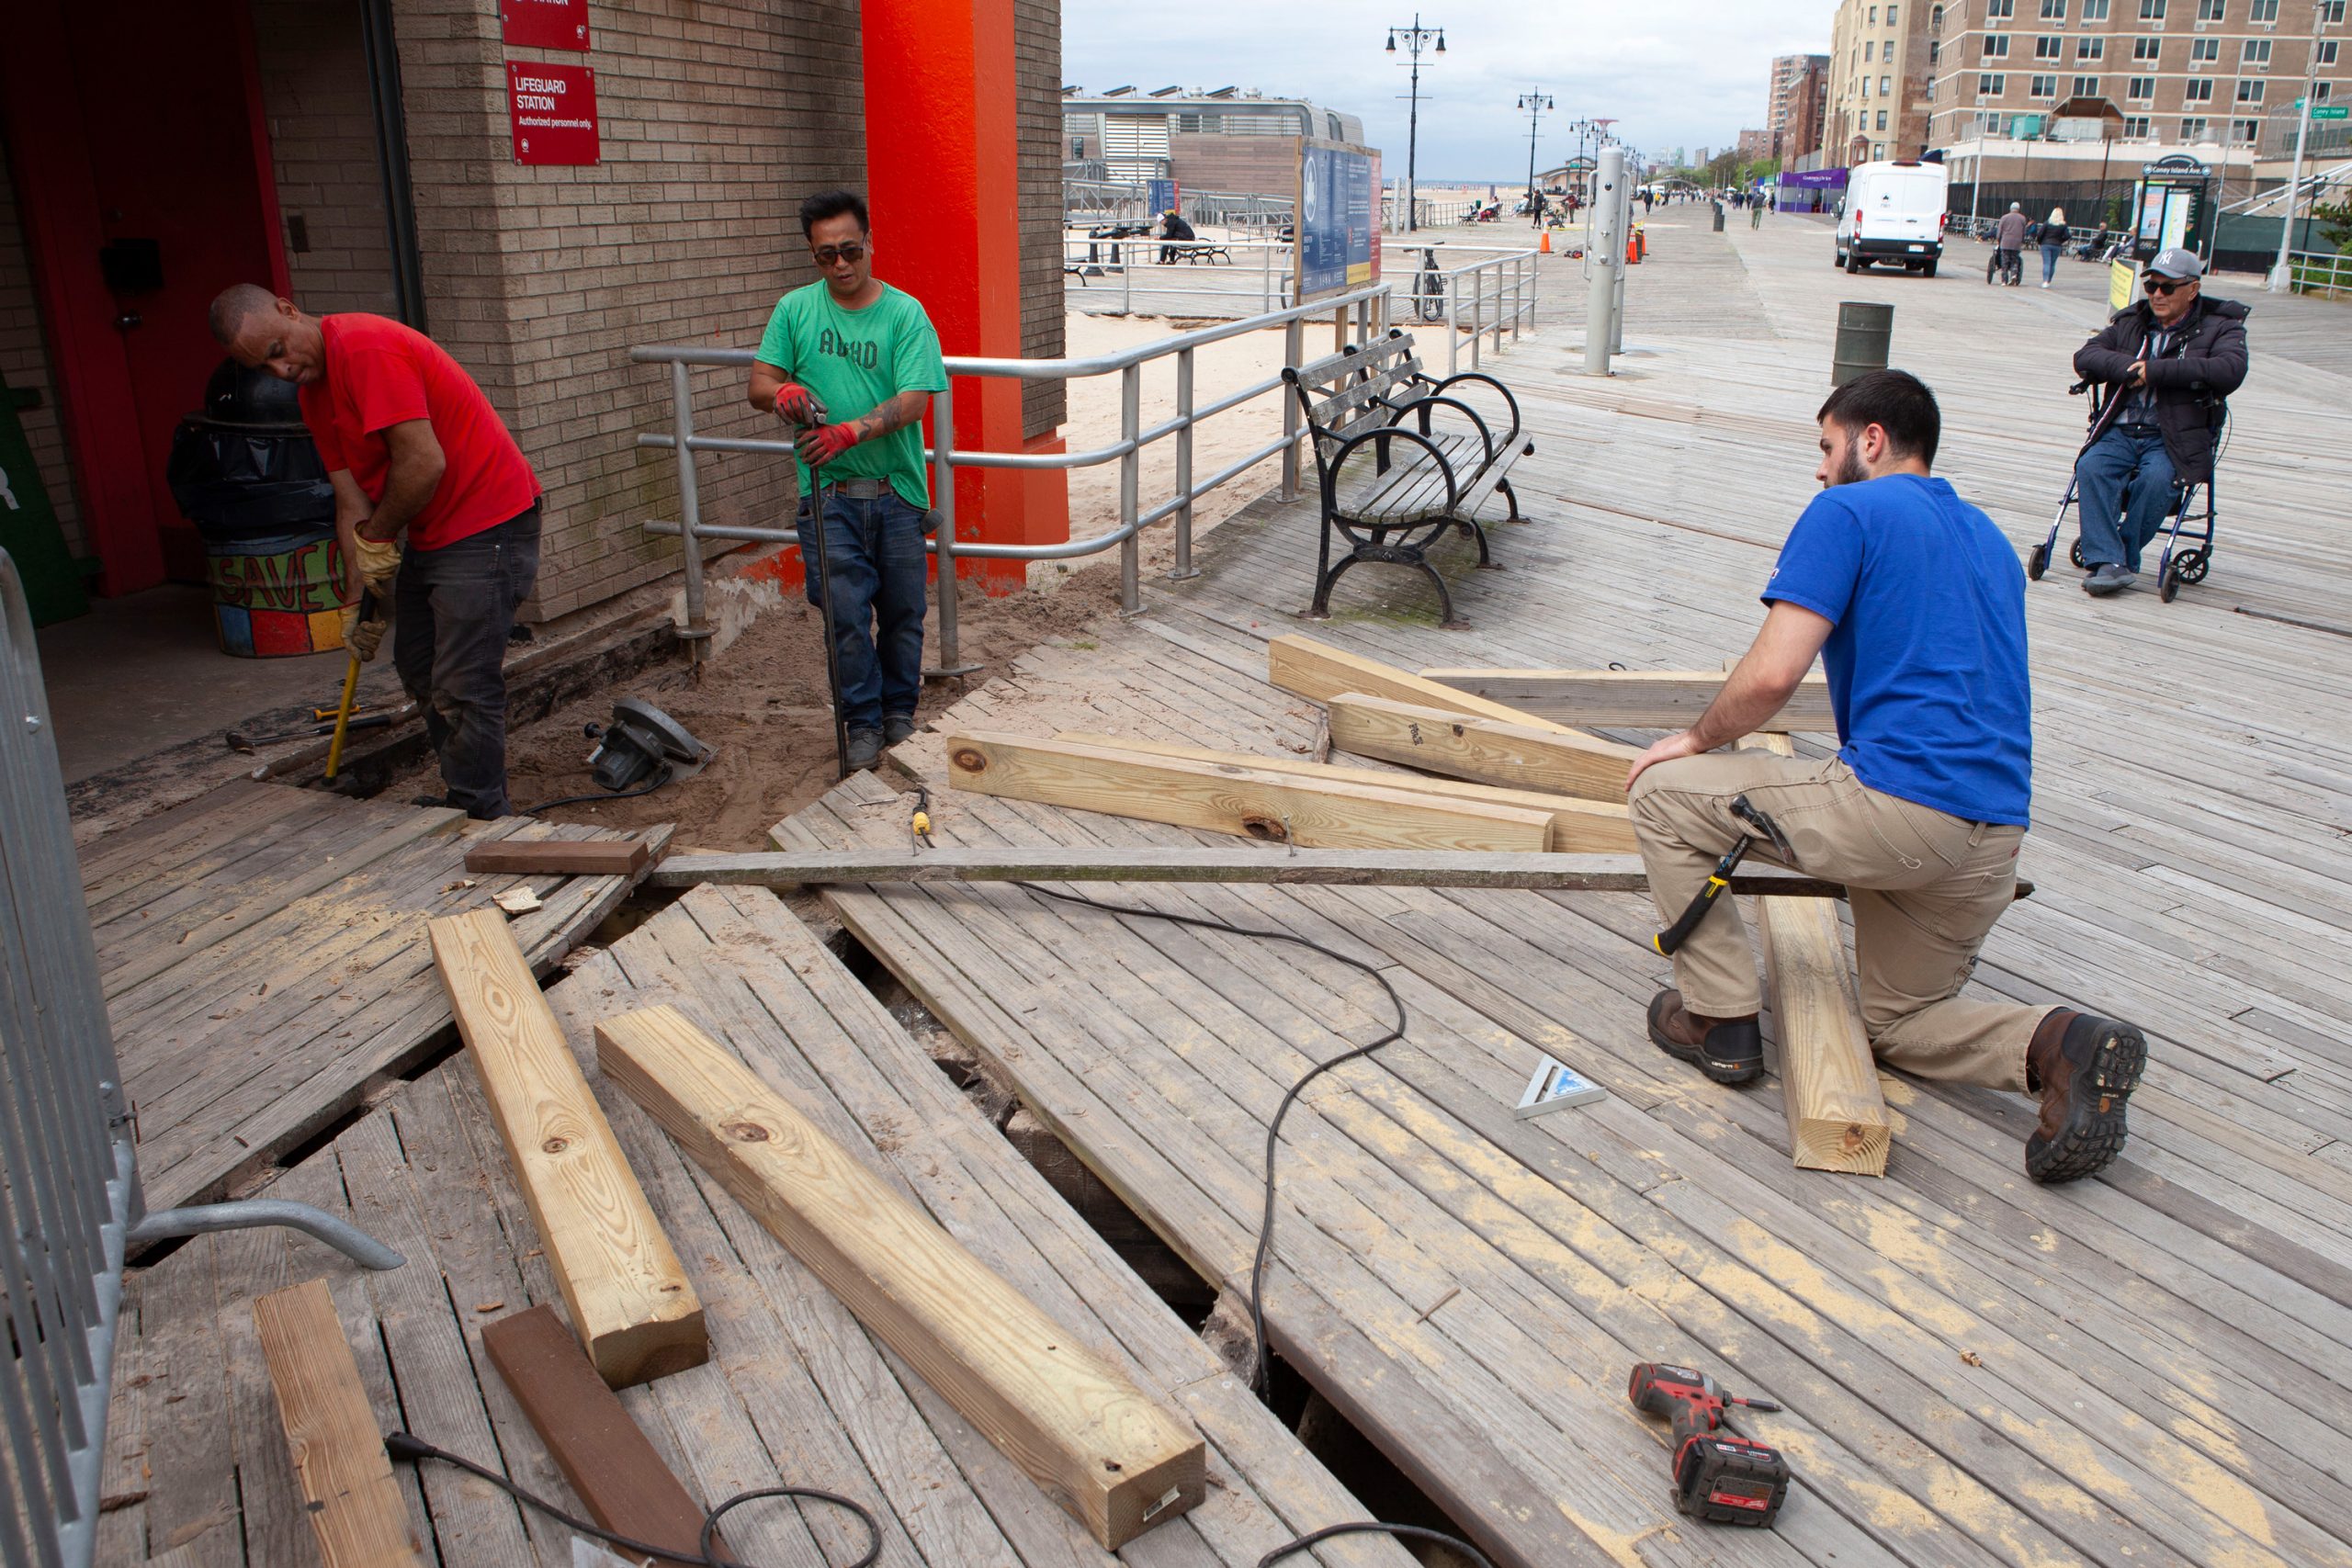 Workers make repairs on the Coney Island boardwalk.